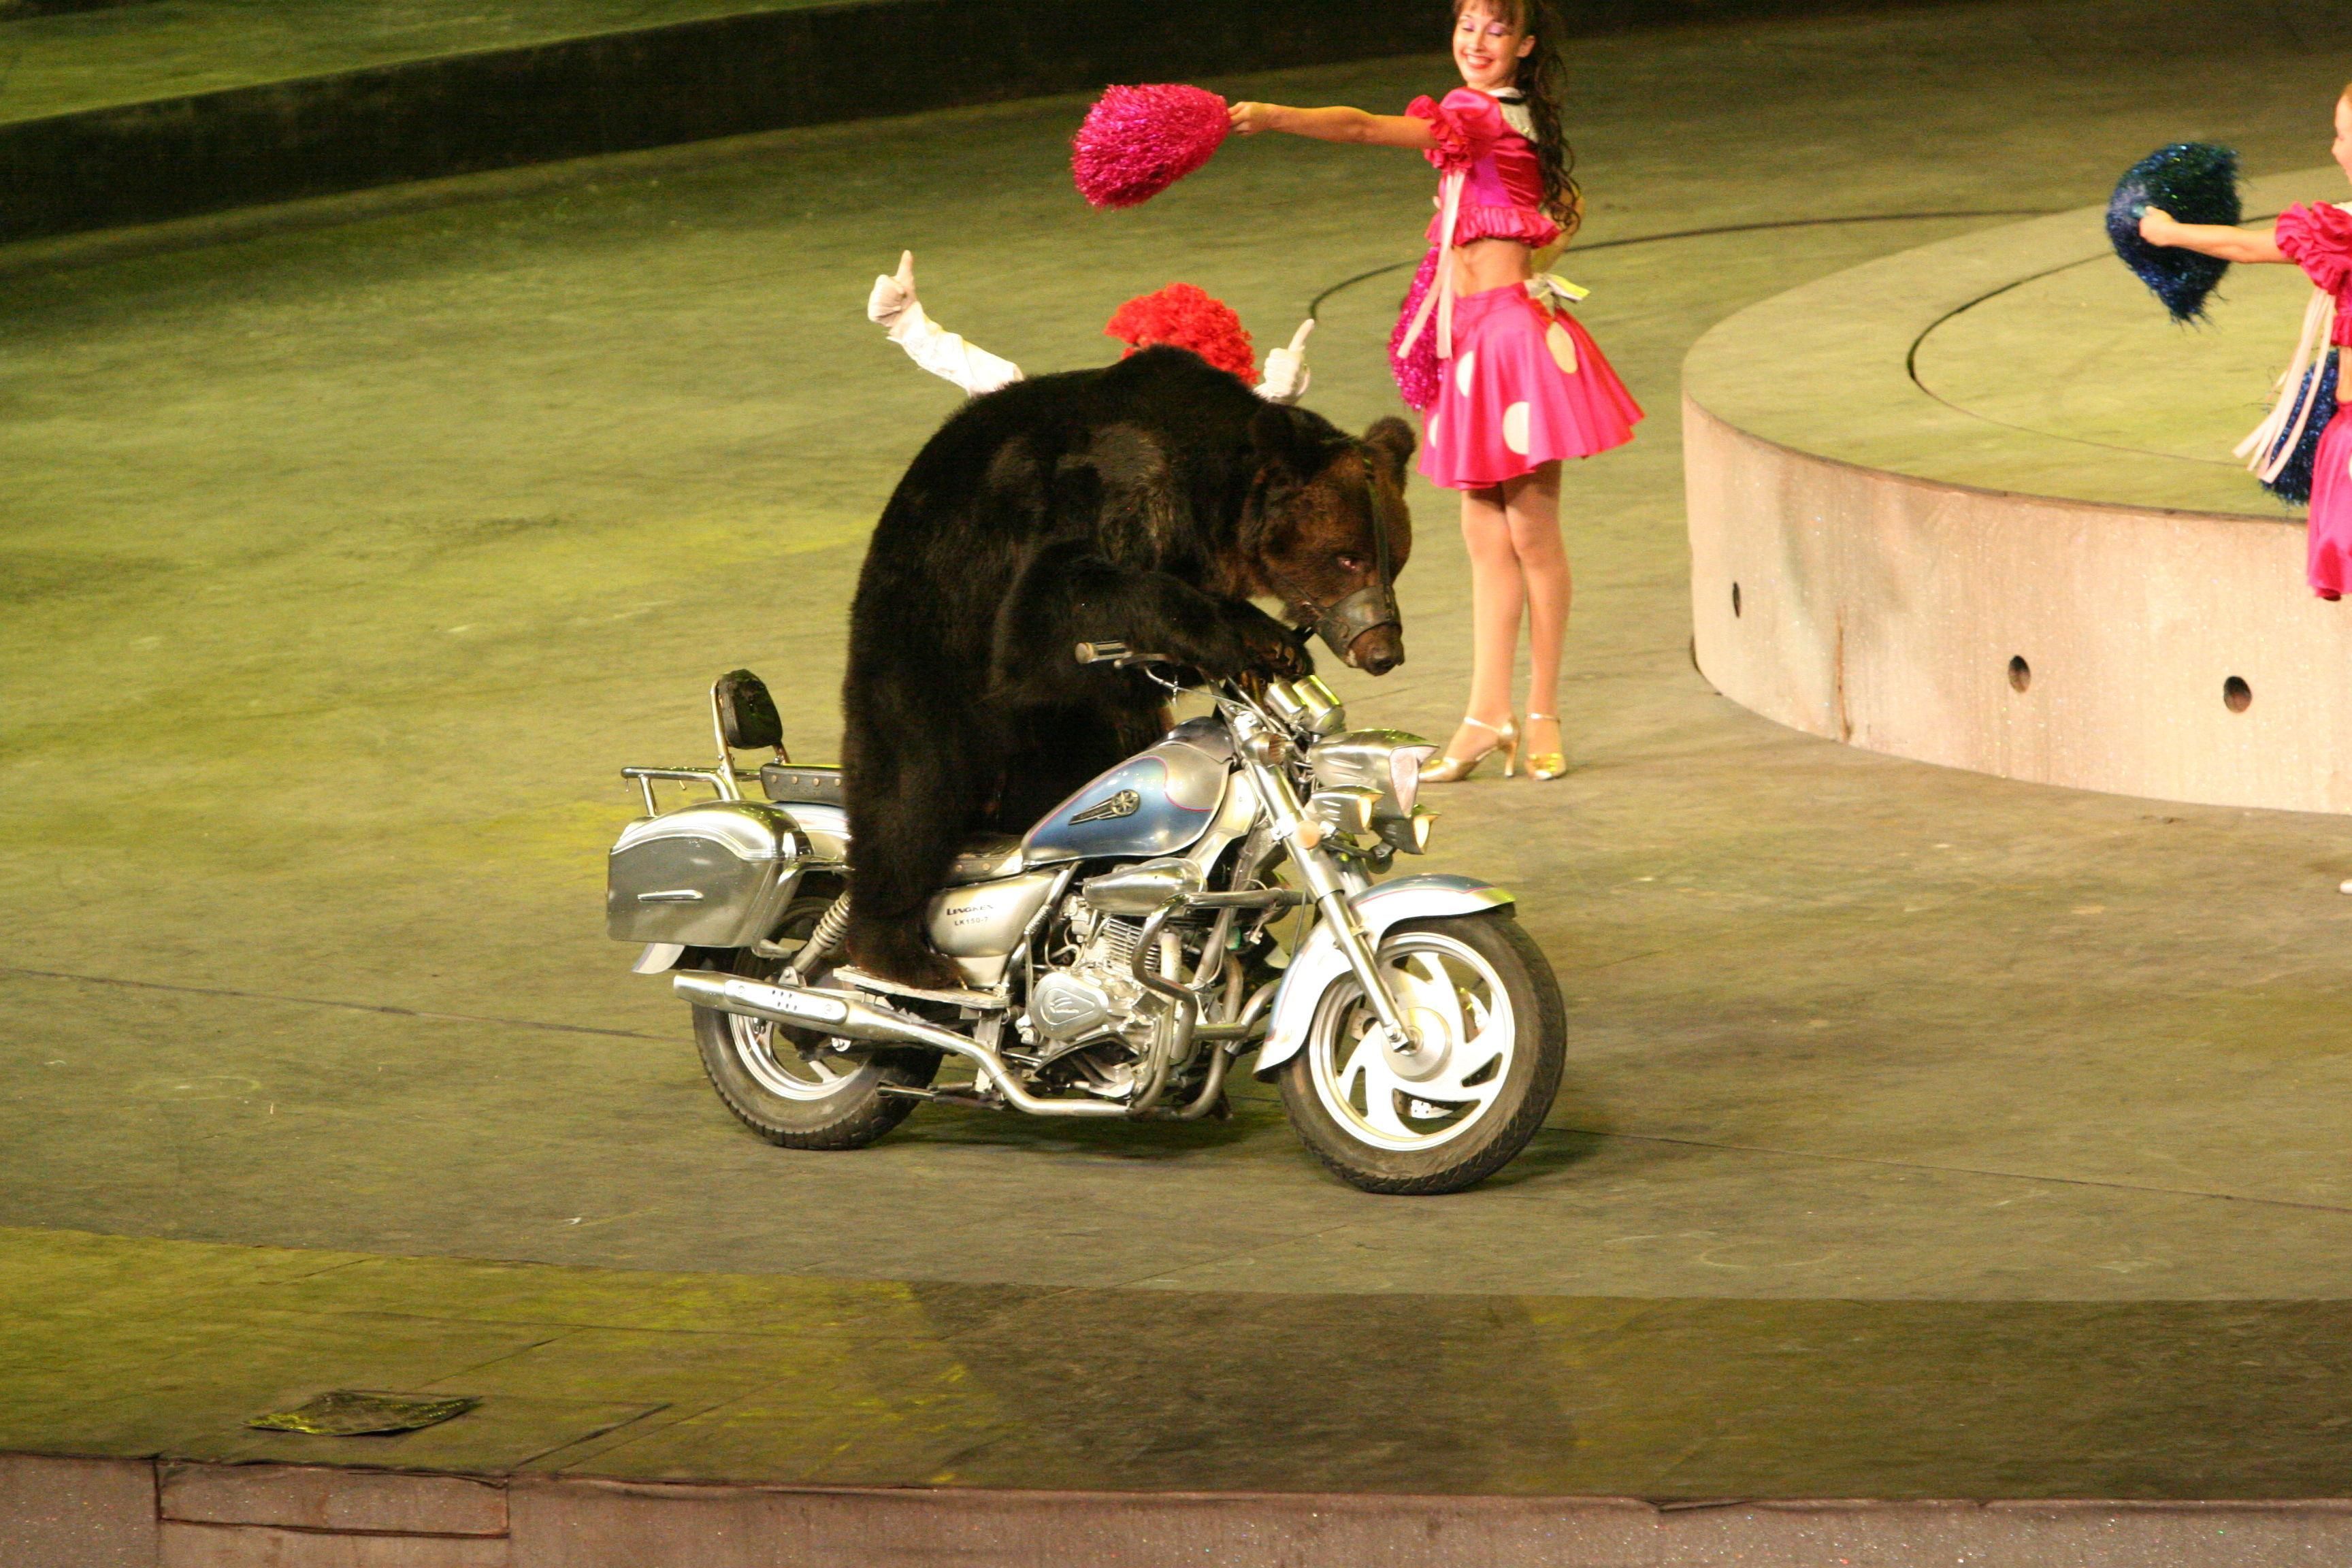 Bears and Motorycles - This is the only good way to mix them